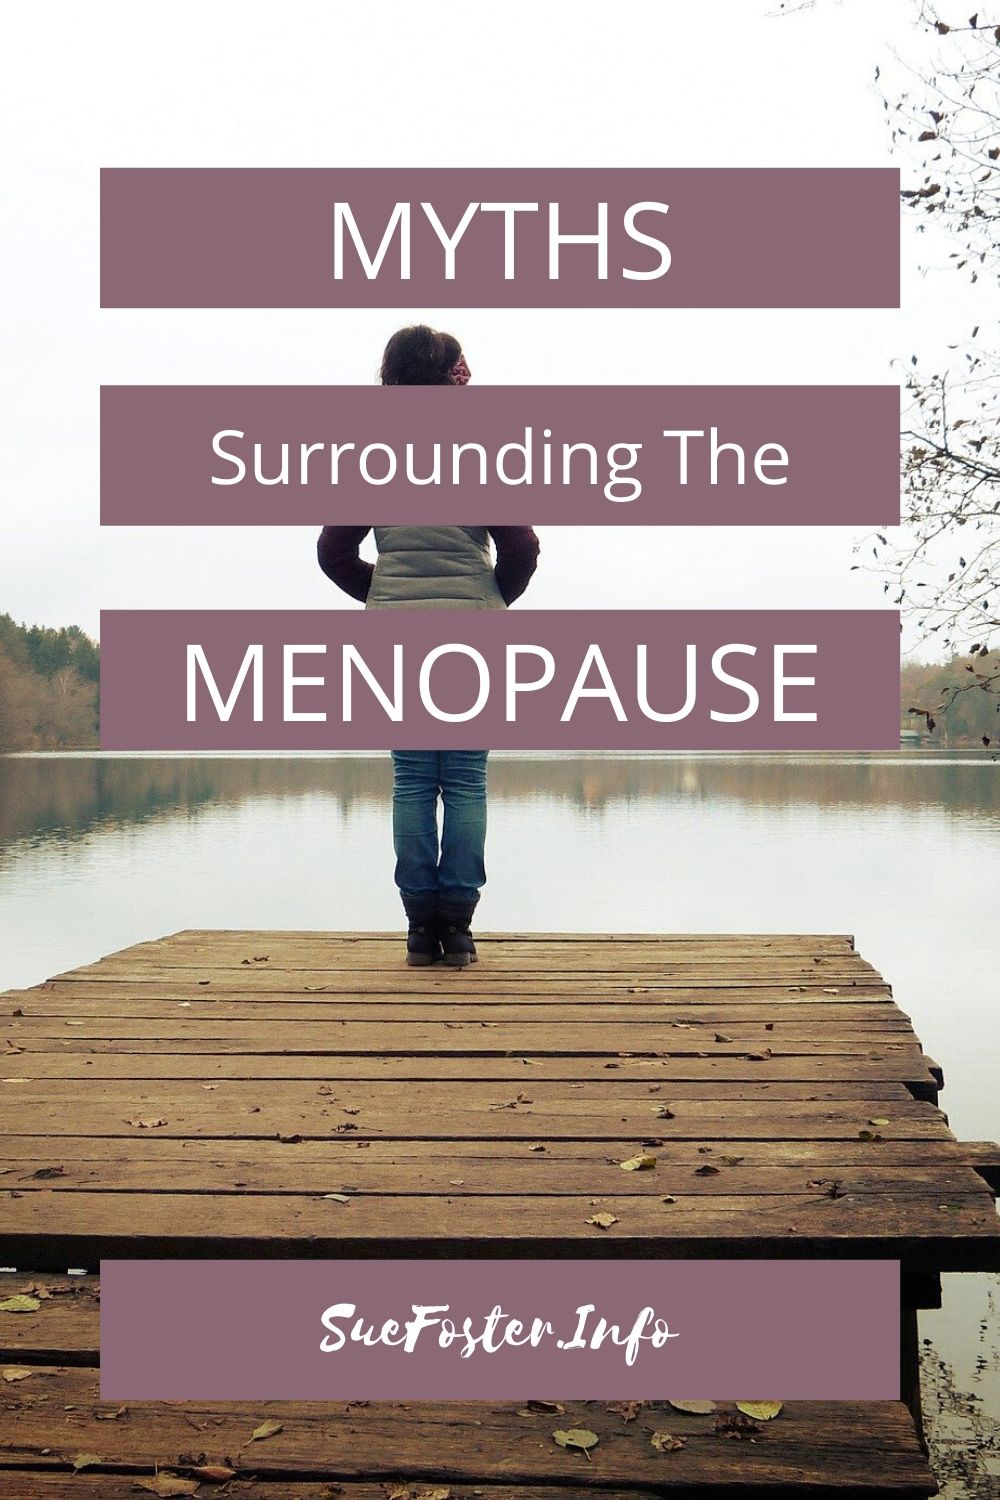 Myths surrounding menopause. Learn about mood swings, memory concerns, weight changes, and sexual health.